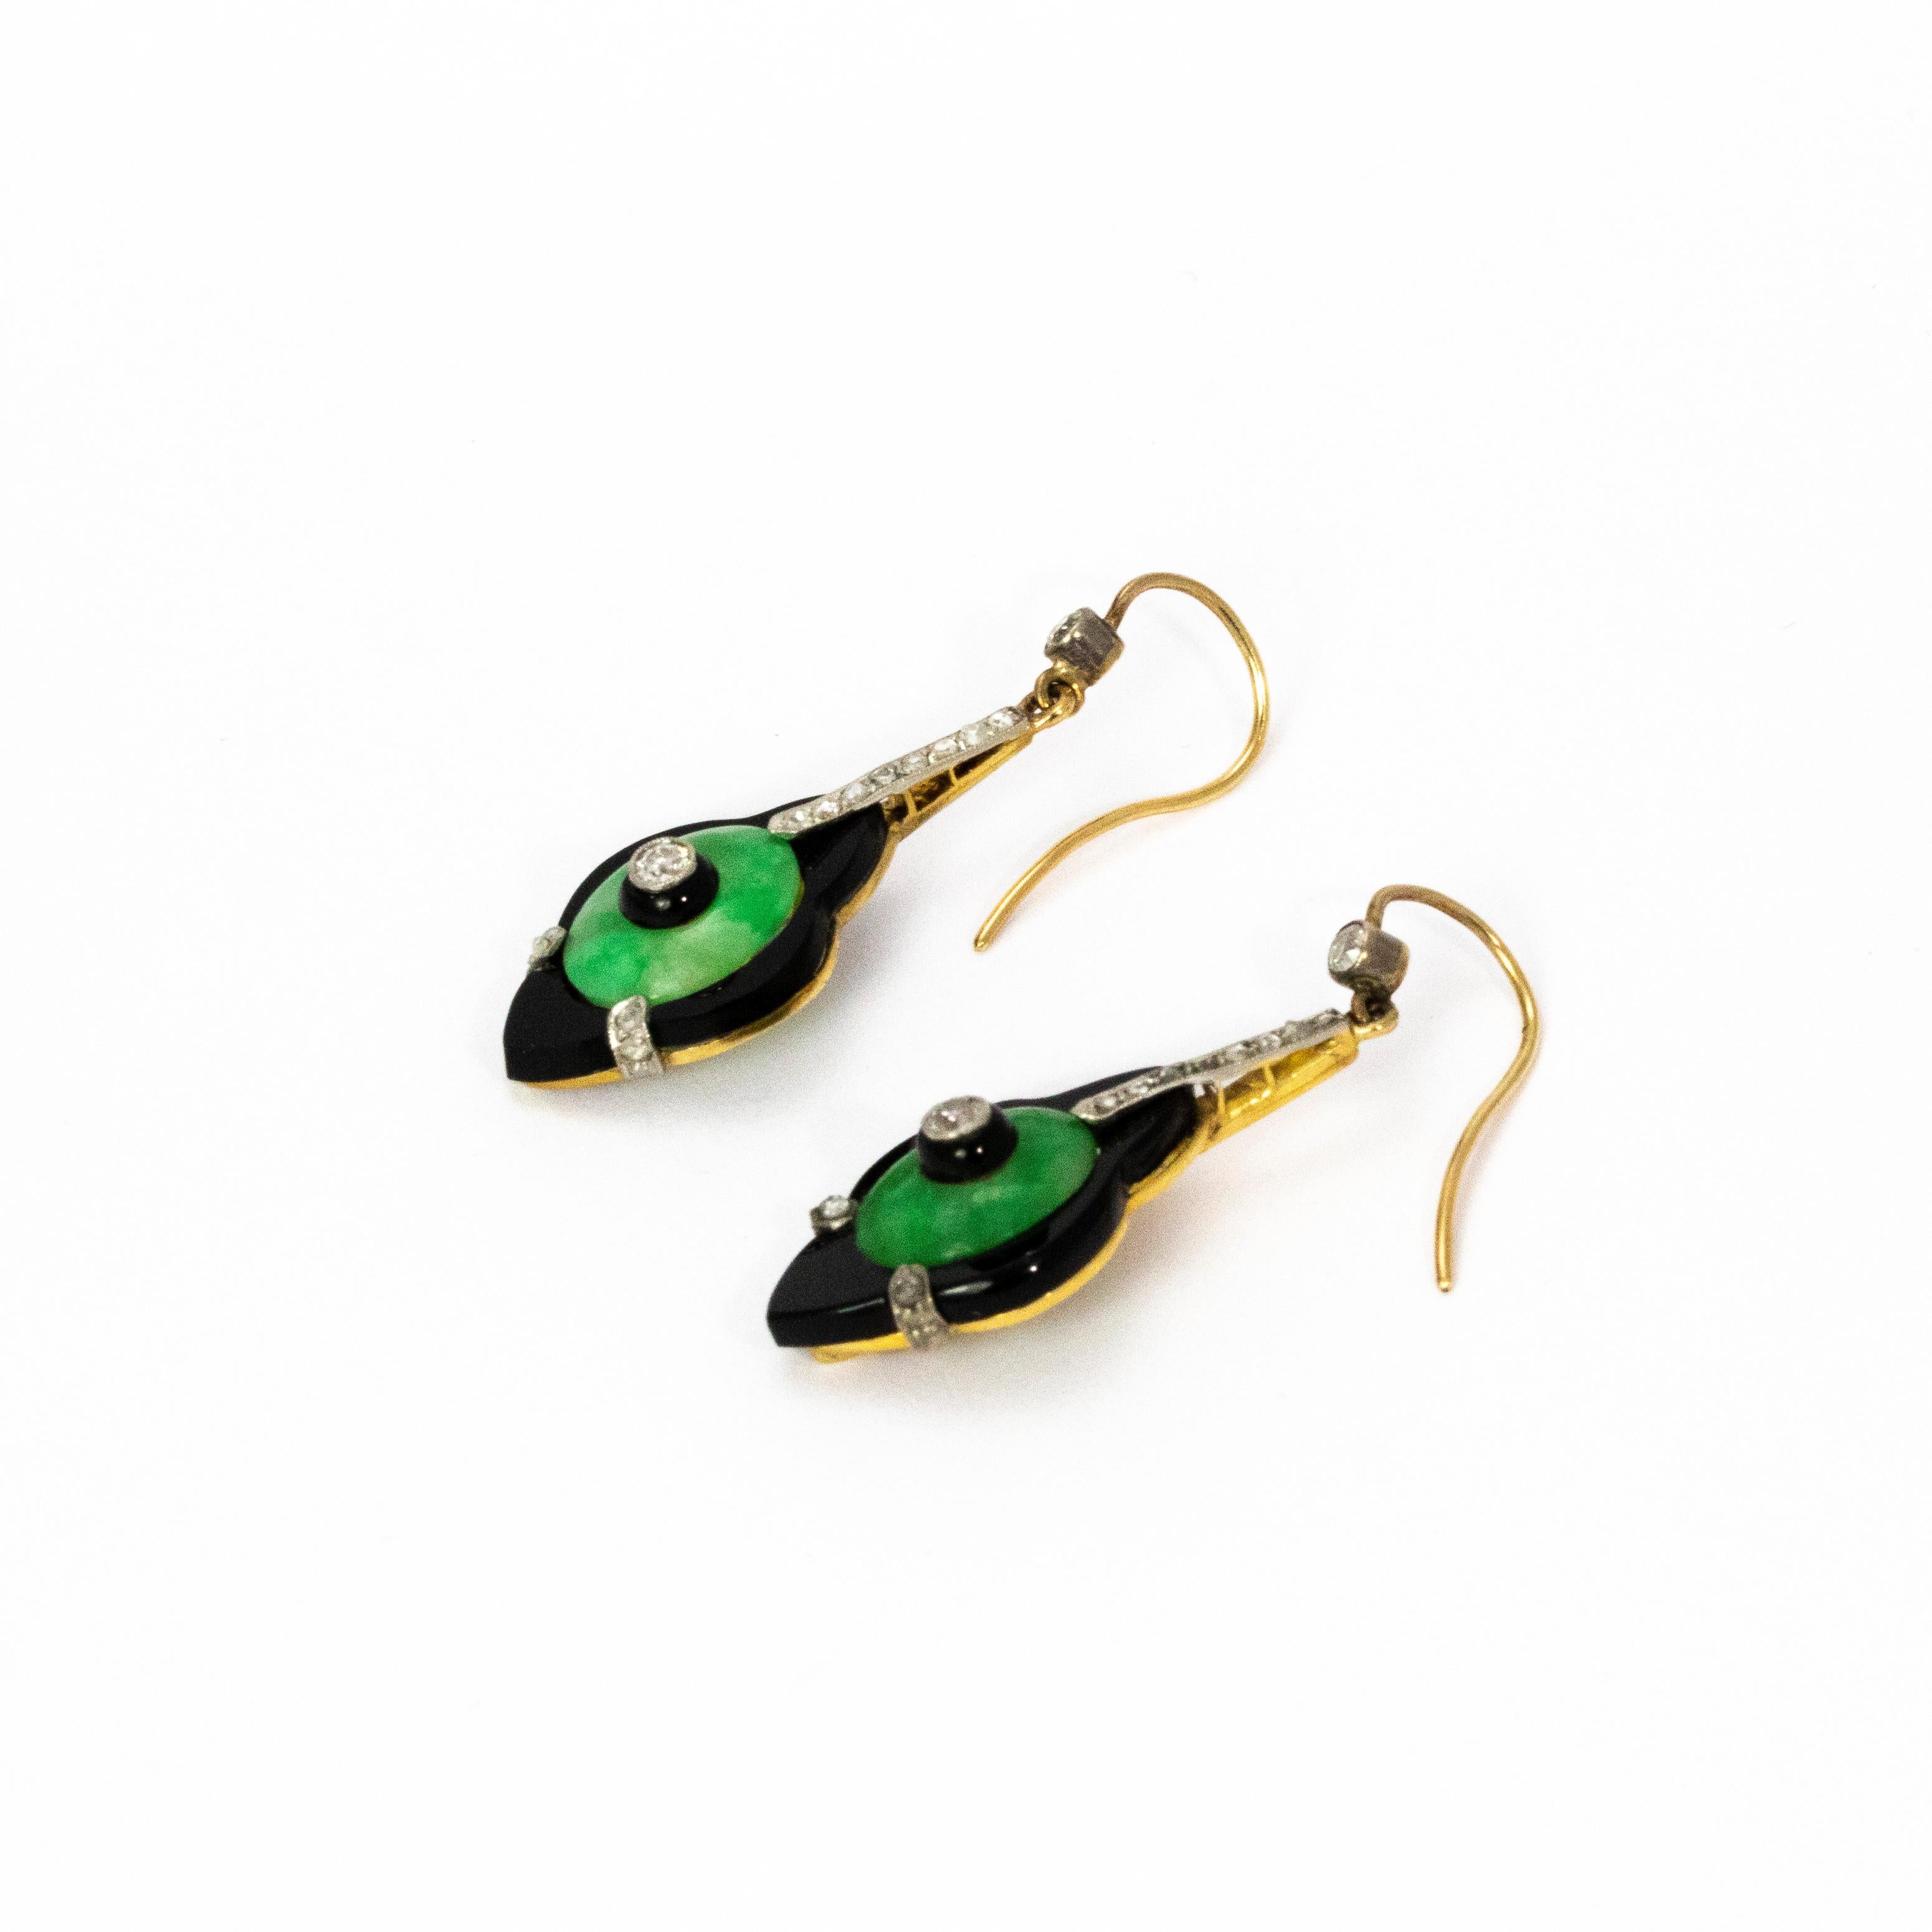 A fantastic pair of Art Deco drop earrings. The central diamonds are old mine cut and measure approximately 5 points each, these sit inside a jade cabochon which itself is surrounded by black onyx which brilliantly accentuate its colour. Modelled in